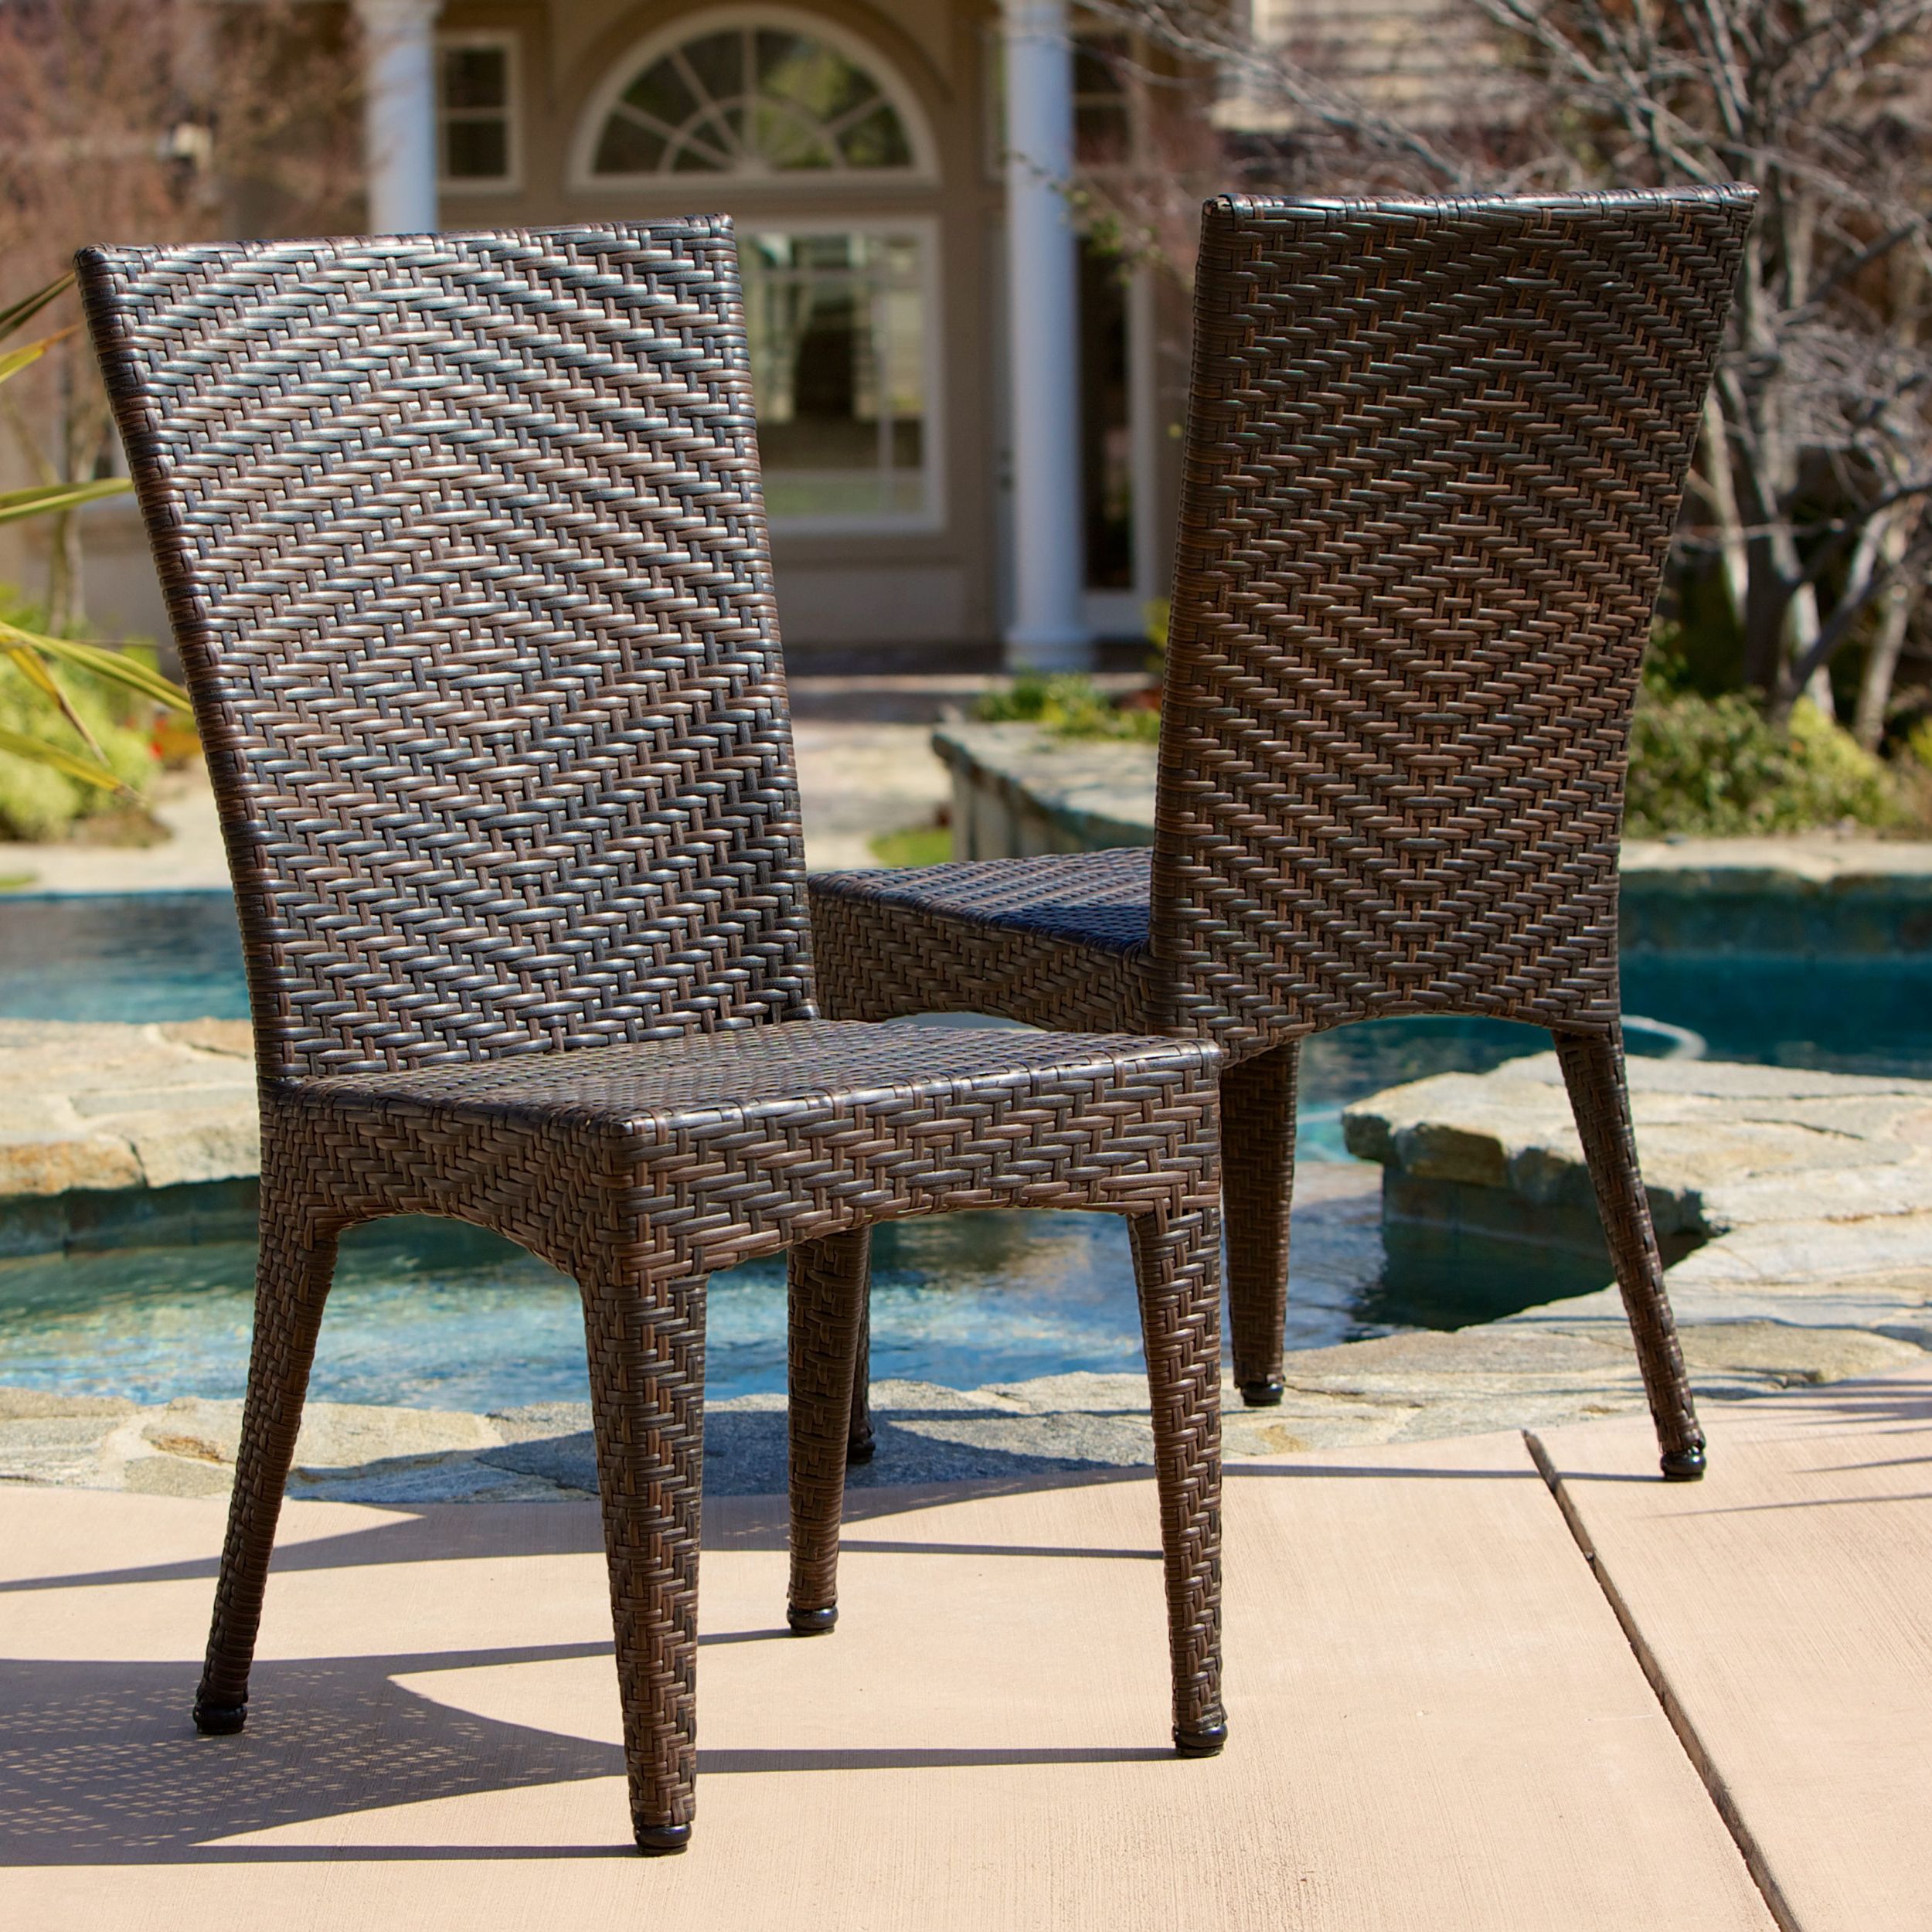 Better Homes & Gardens Outdoor Wicker Chairs, Brown, Set Of 2 – Walmart In Most Up To Date Rattan Wicker Outdoor Seating Sets (View 2 of 15)